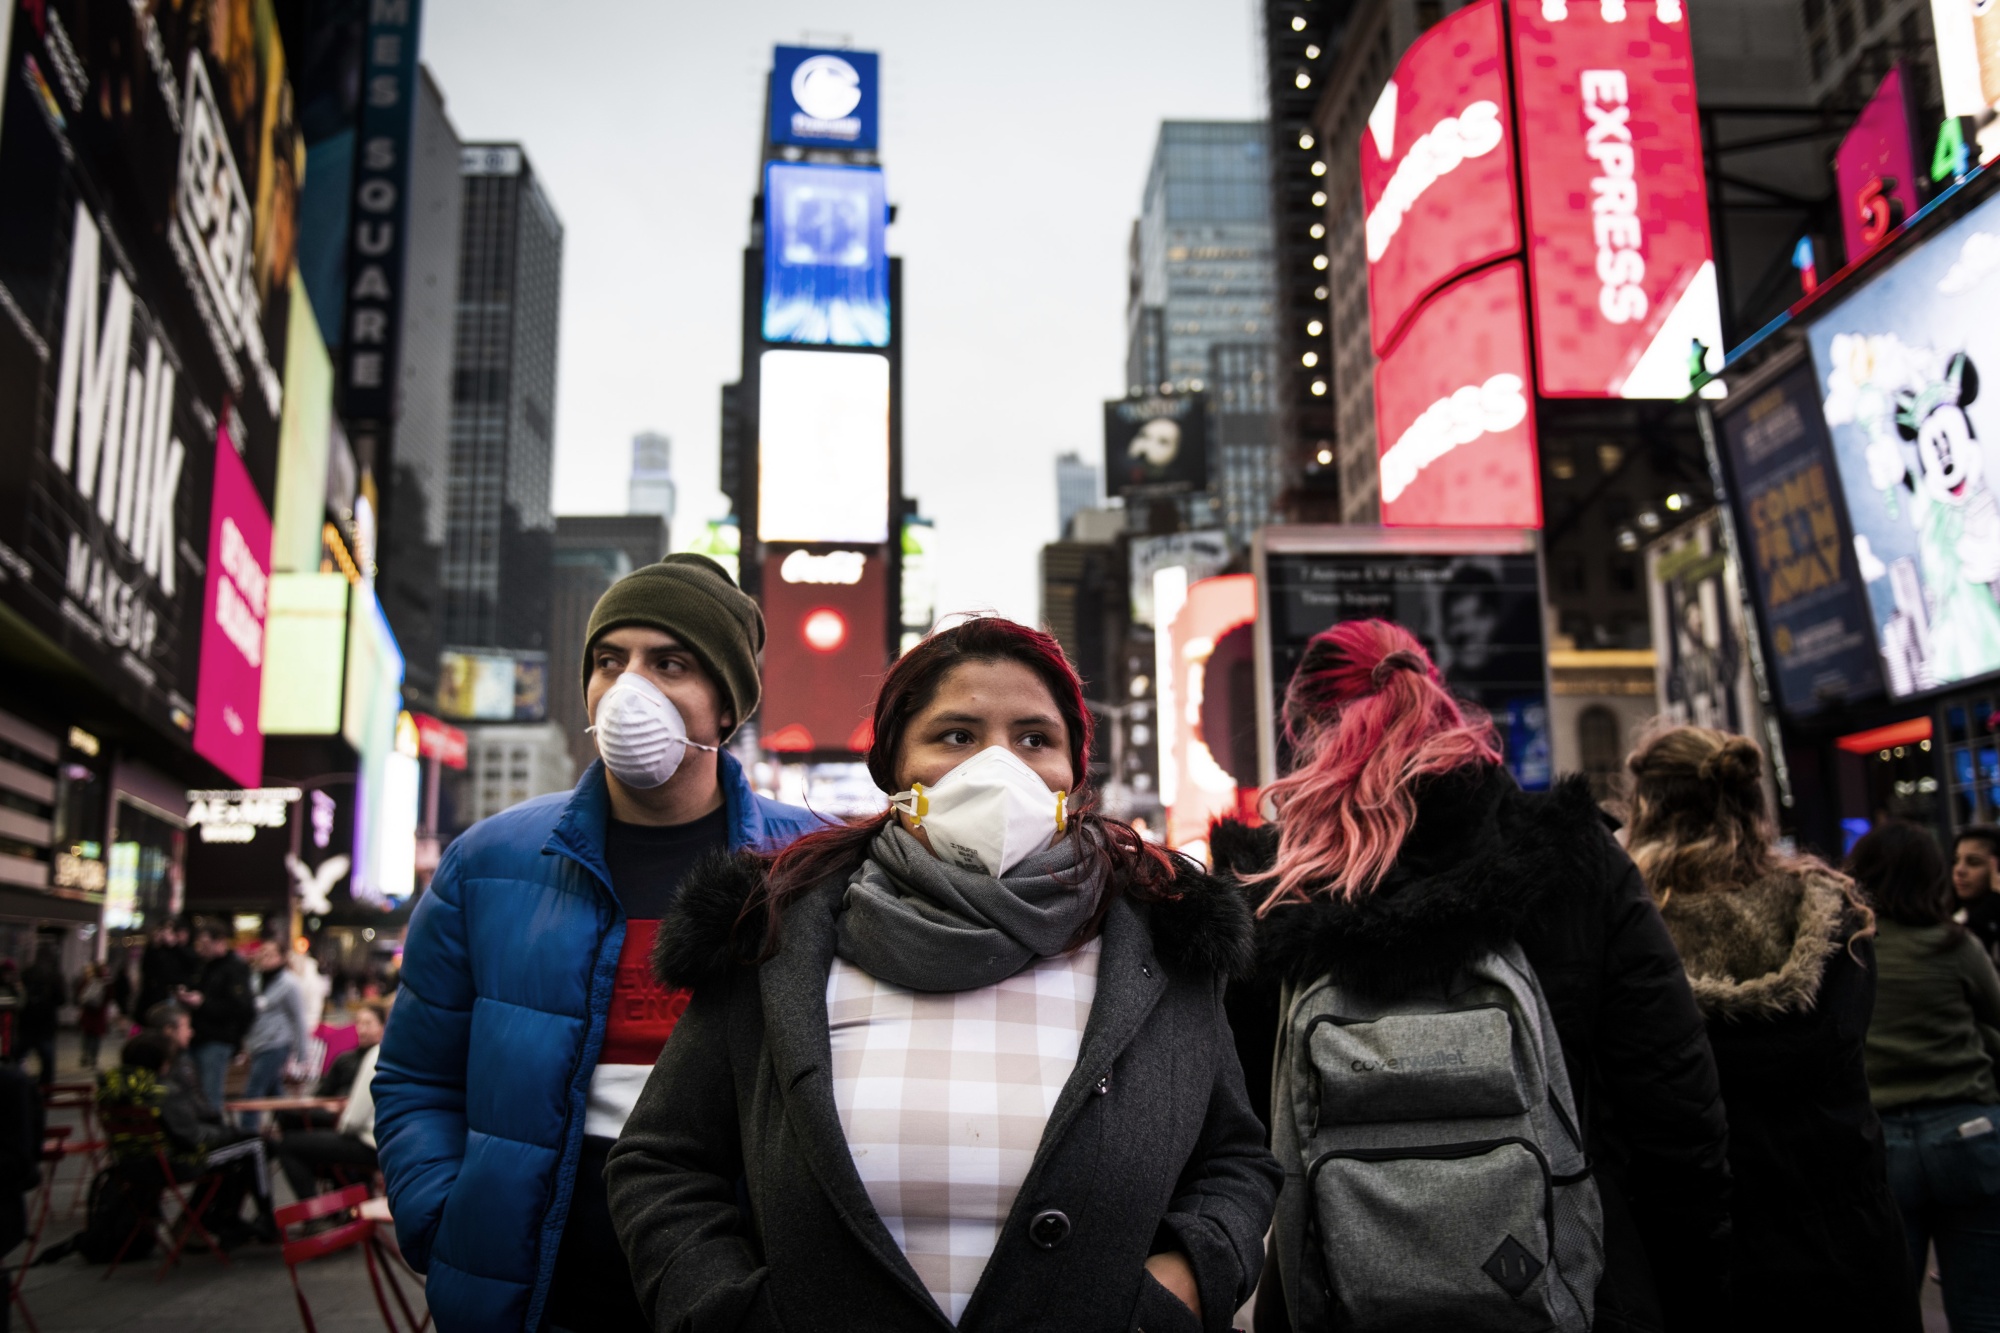 Pedestrians wearing protective masks walk through the Times Square in New York, March 12.